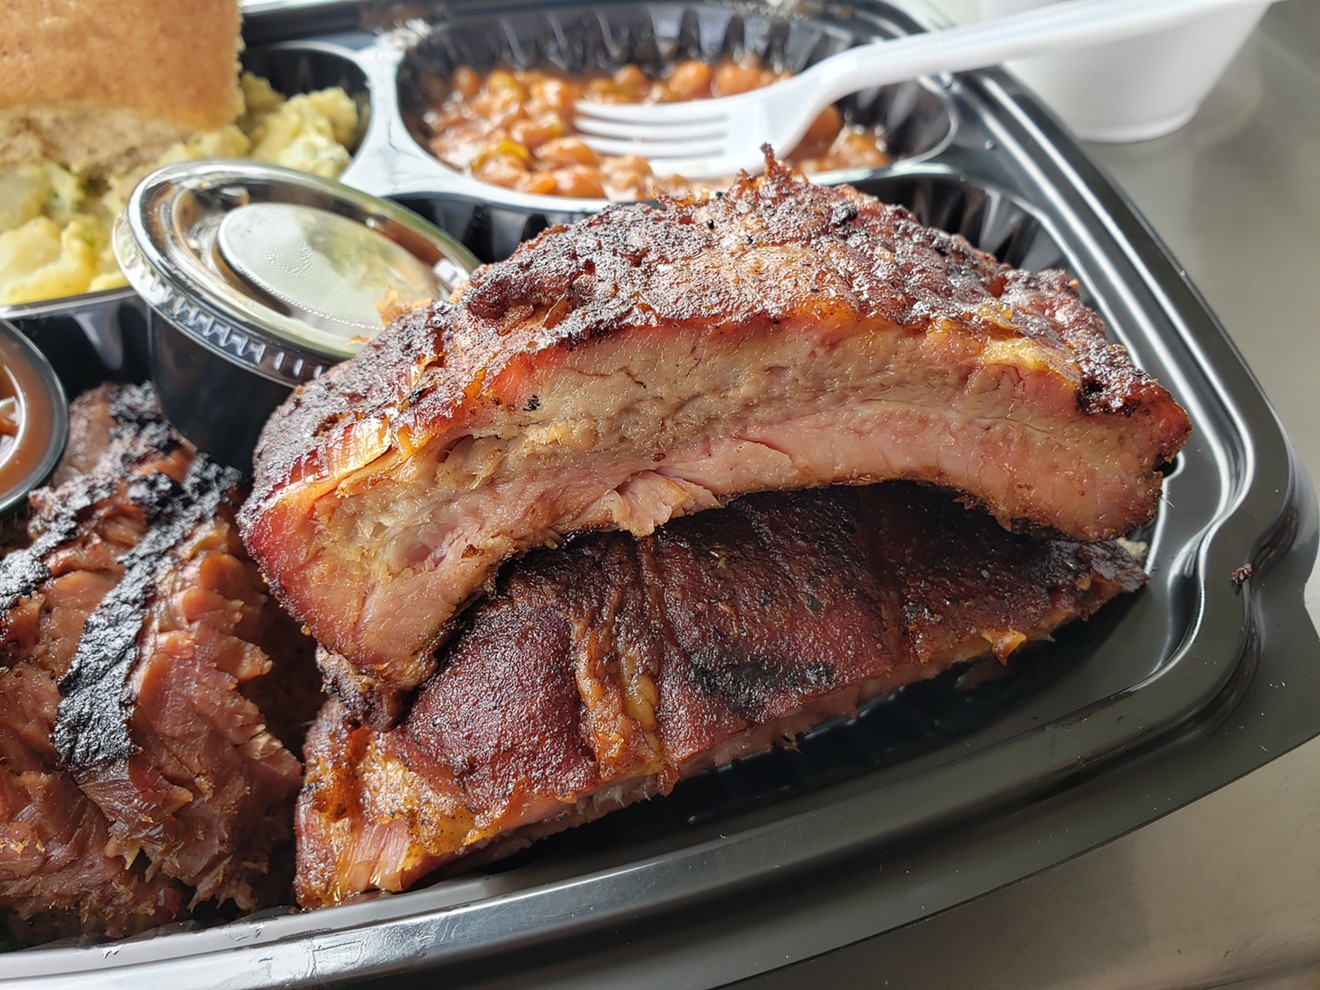 The ribs at Off the Bone Barbeque definitely qualify as art as well as a must-have culinary stop.